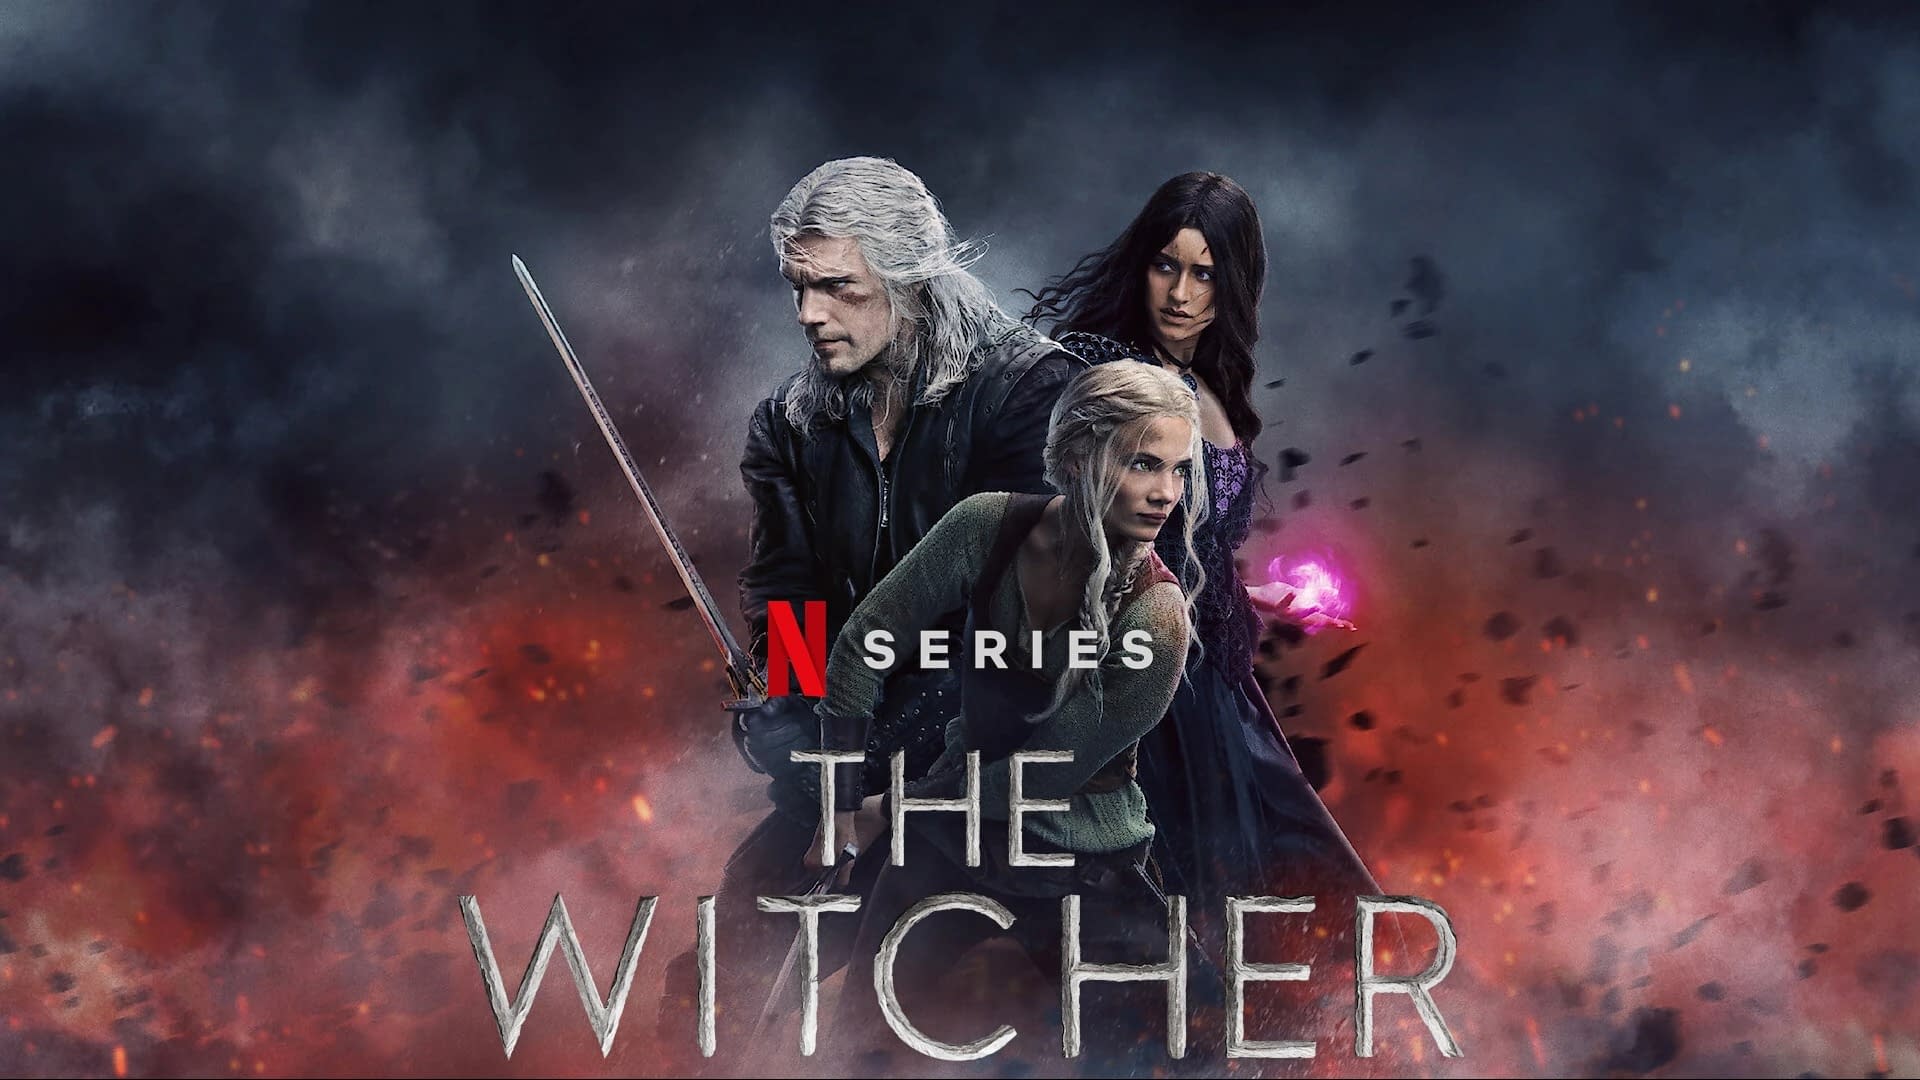 The Witcher Array Will Make Final With Season 5